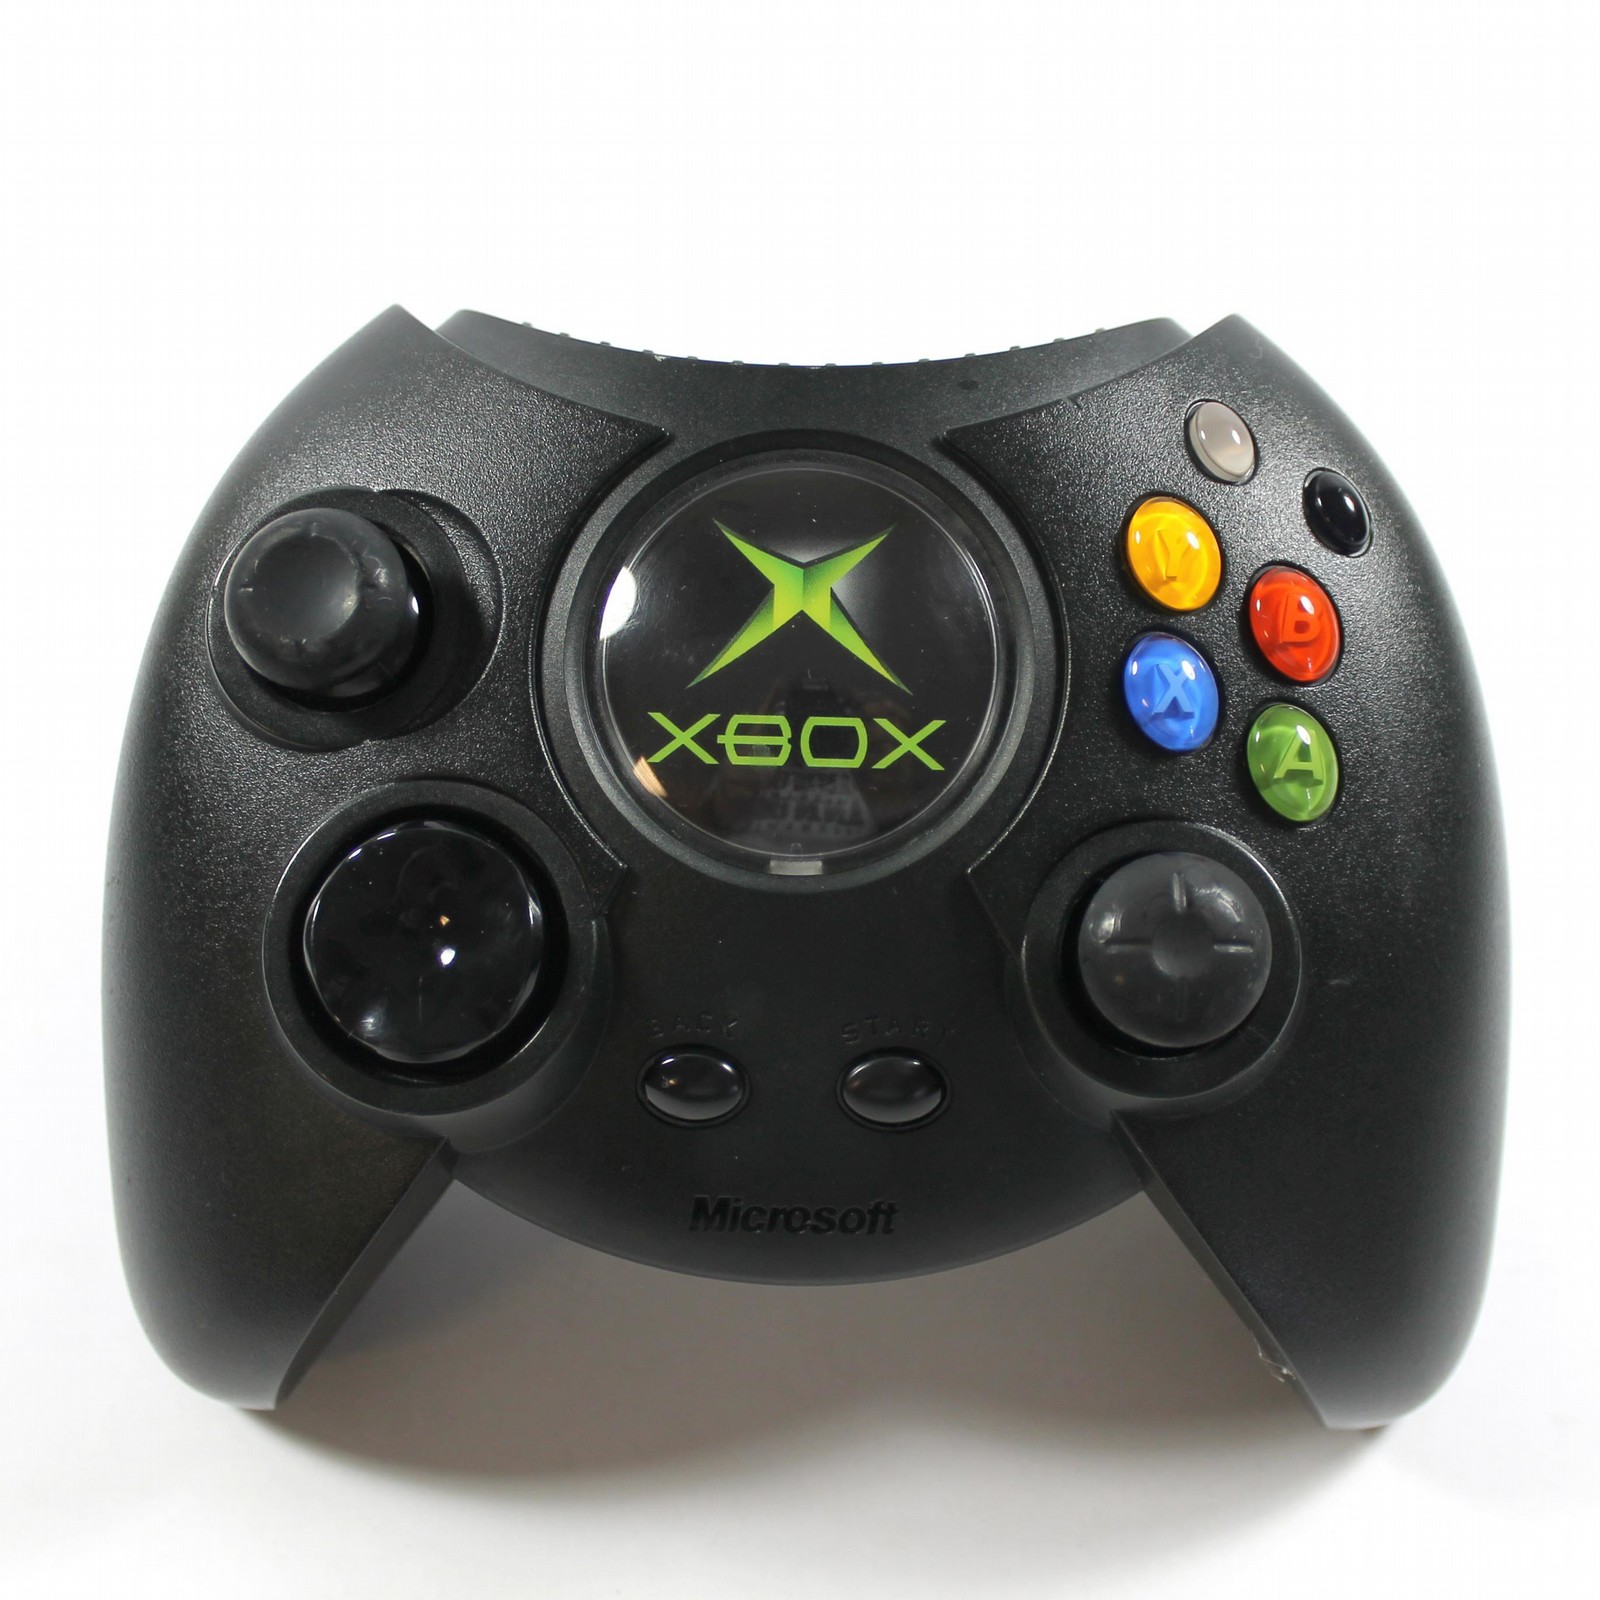 Is this the best controller for FPS and racers on the Xbox? 